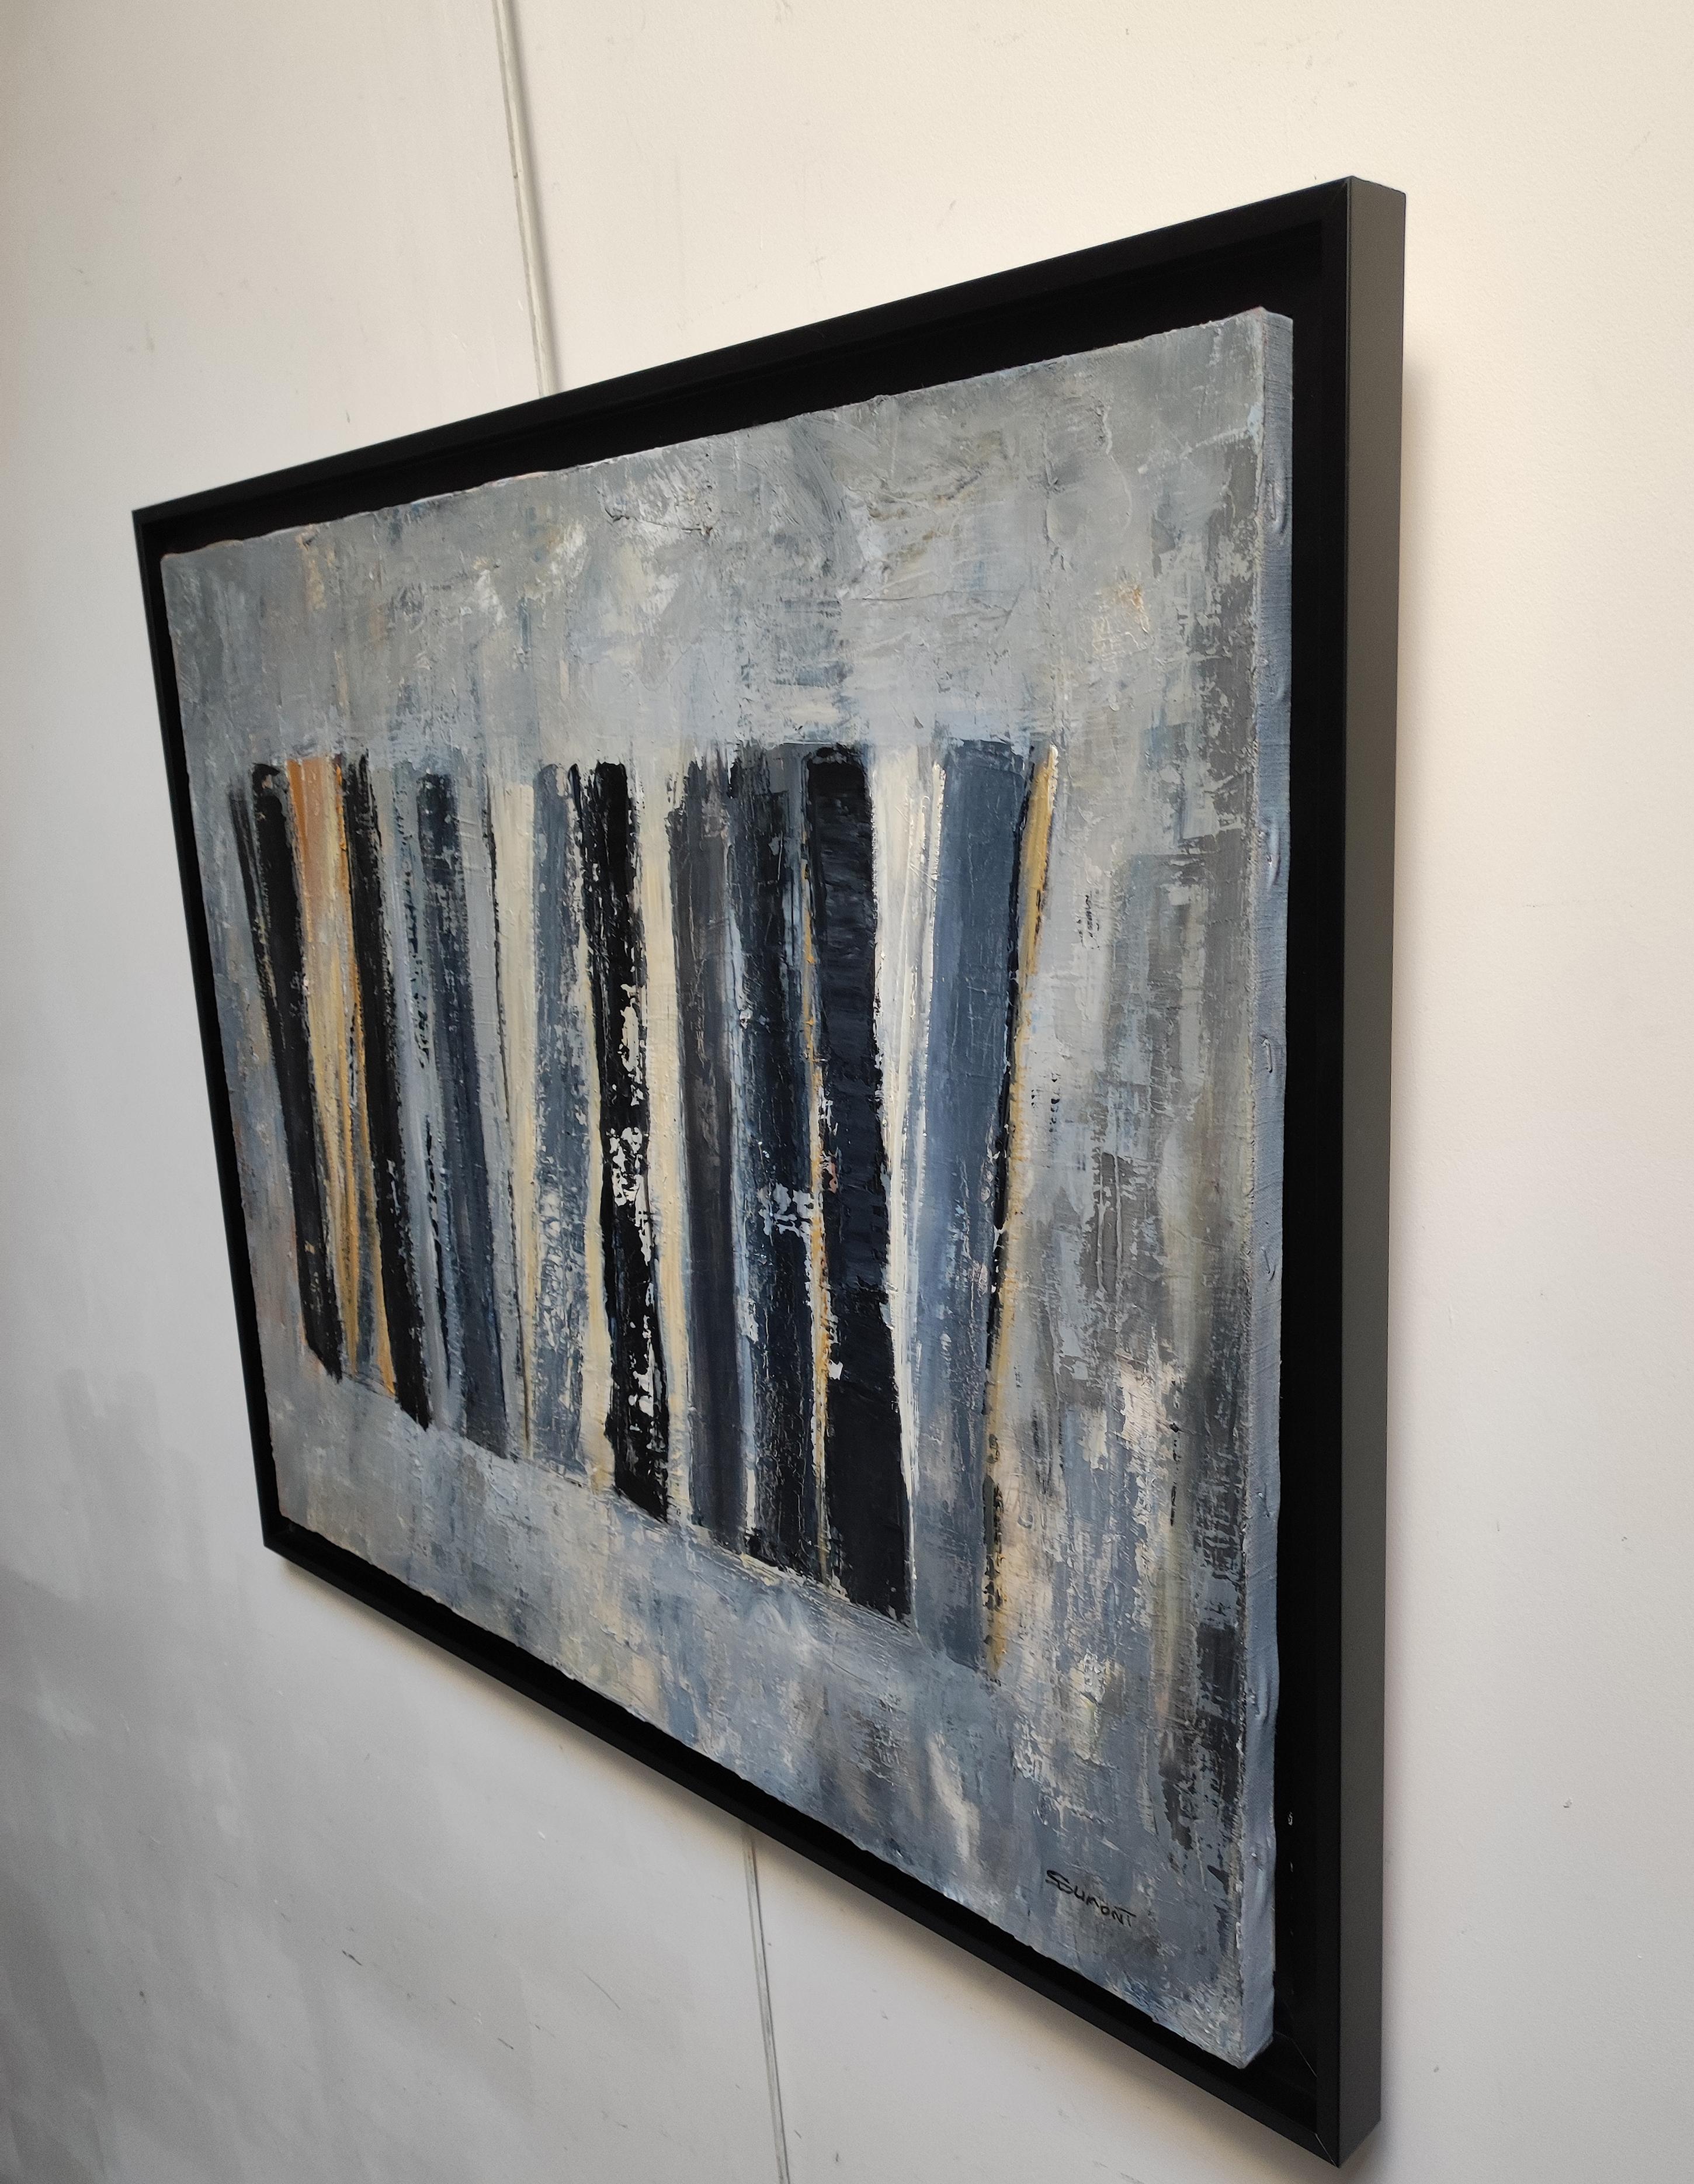 Each work contains its share of mystery, Worked in shades of blue gray we can guess books arranged flat in a library. The spectator remains free of his interpretation by seeing books or an abstract canvas. Worked in oil and knife, the subject ends